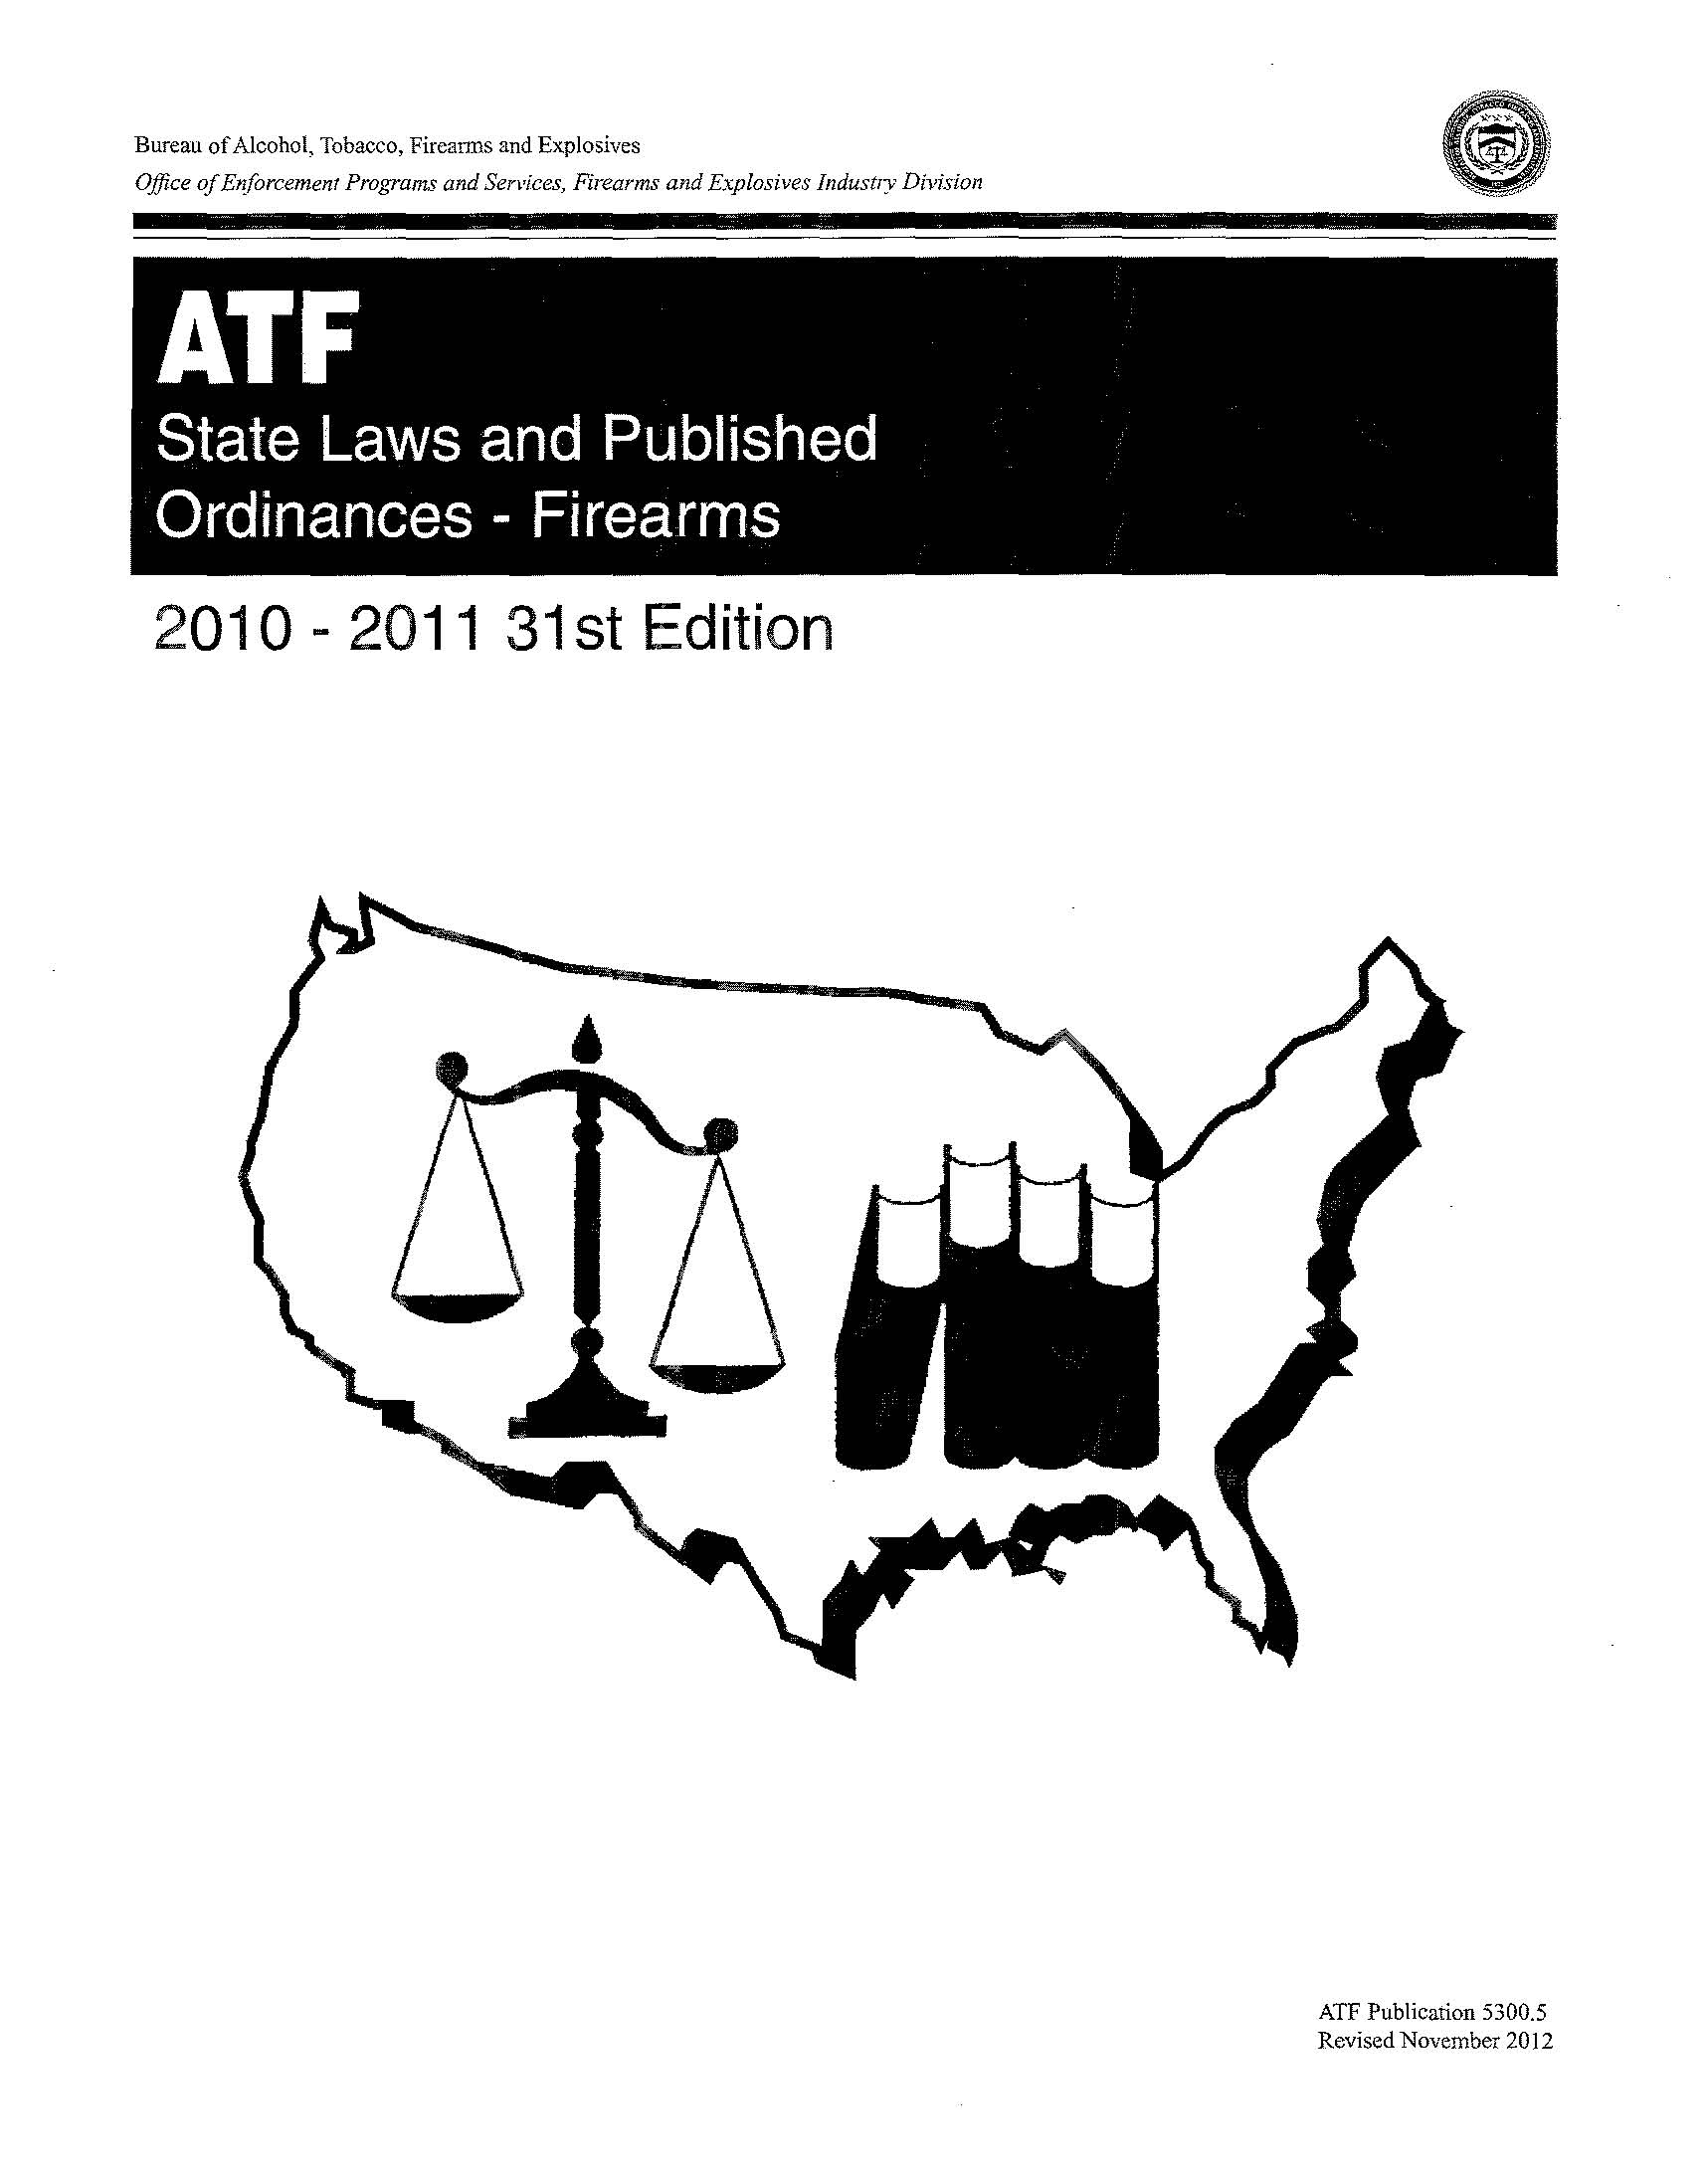 2010 - 2011, 31st Edition - State Laws and Published Ordinances - Firearms cover